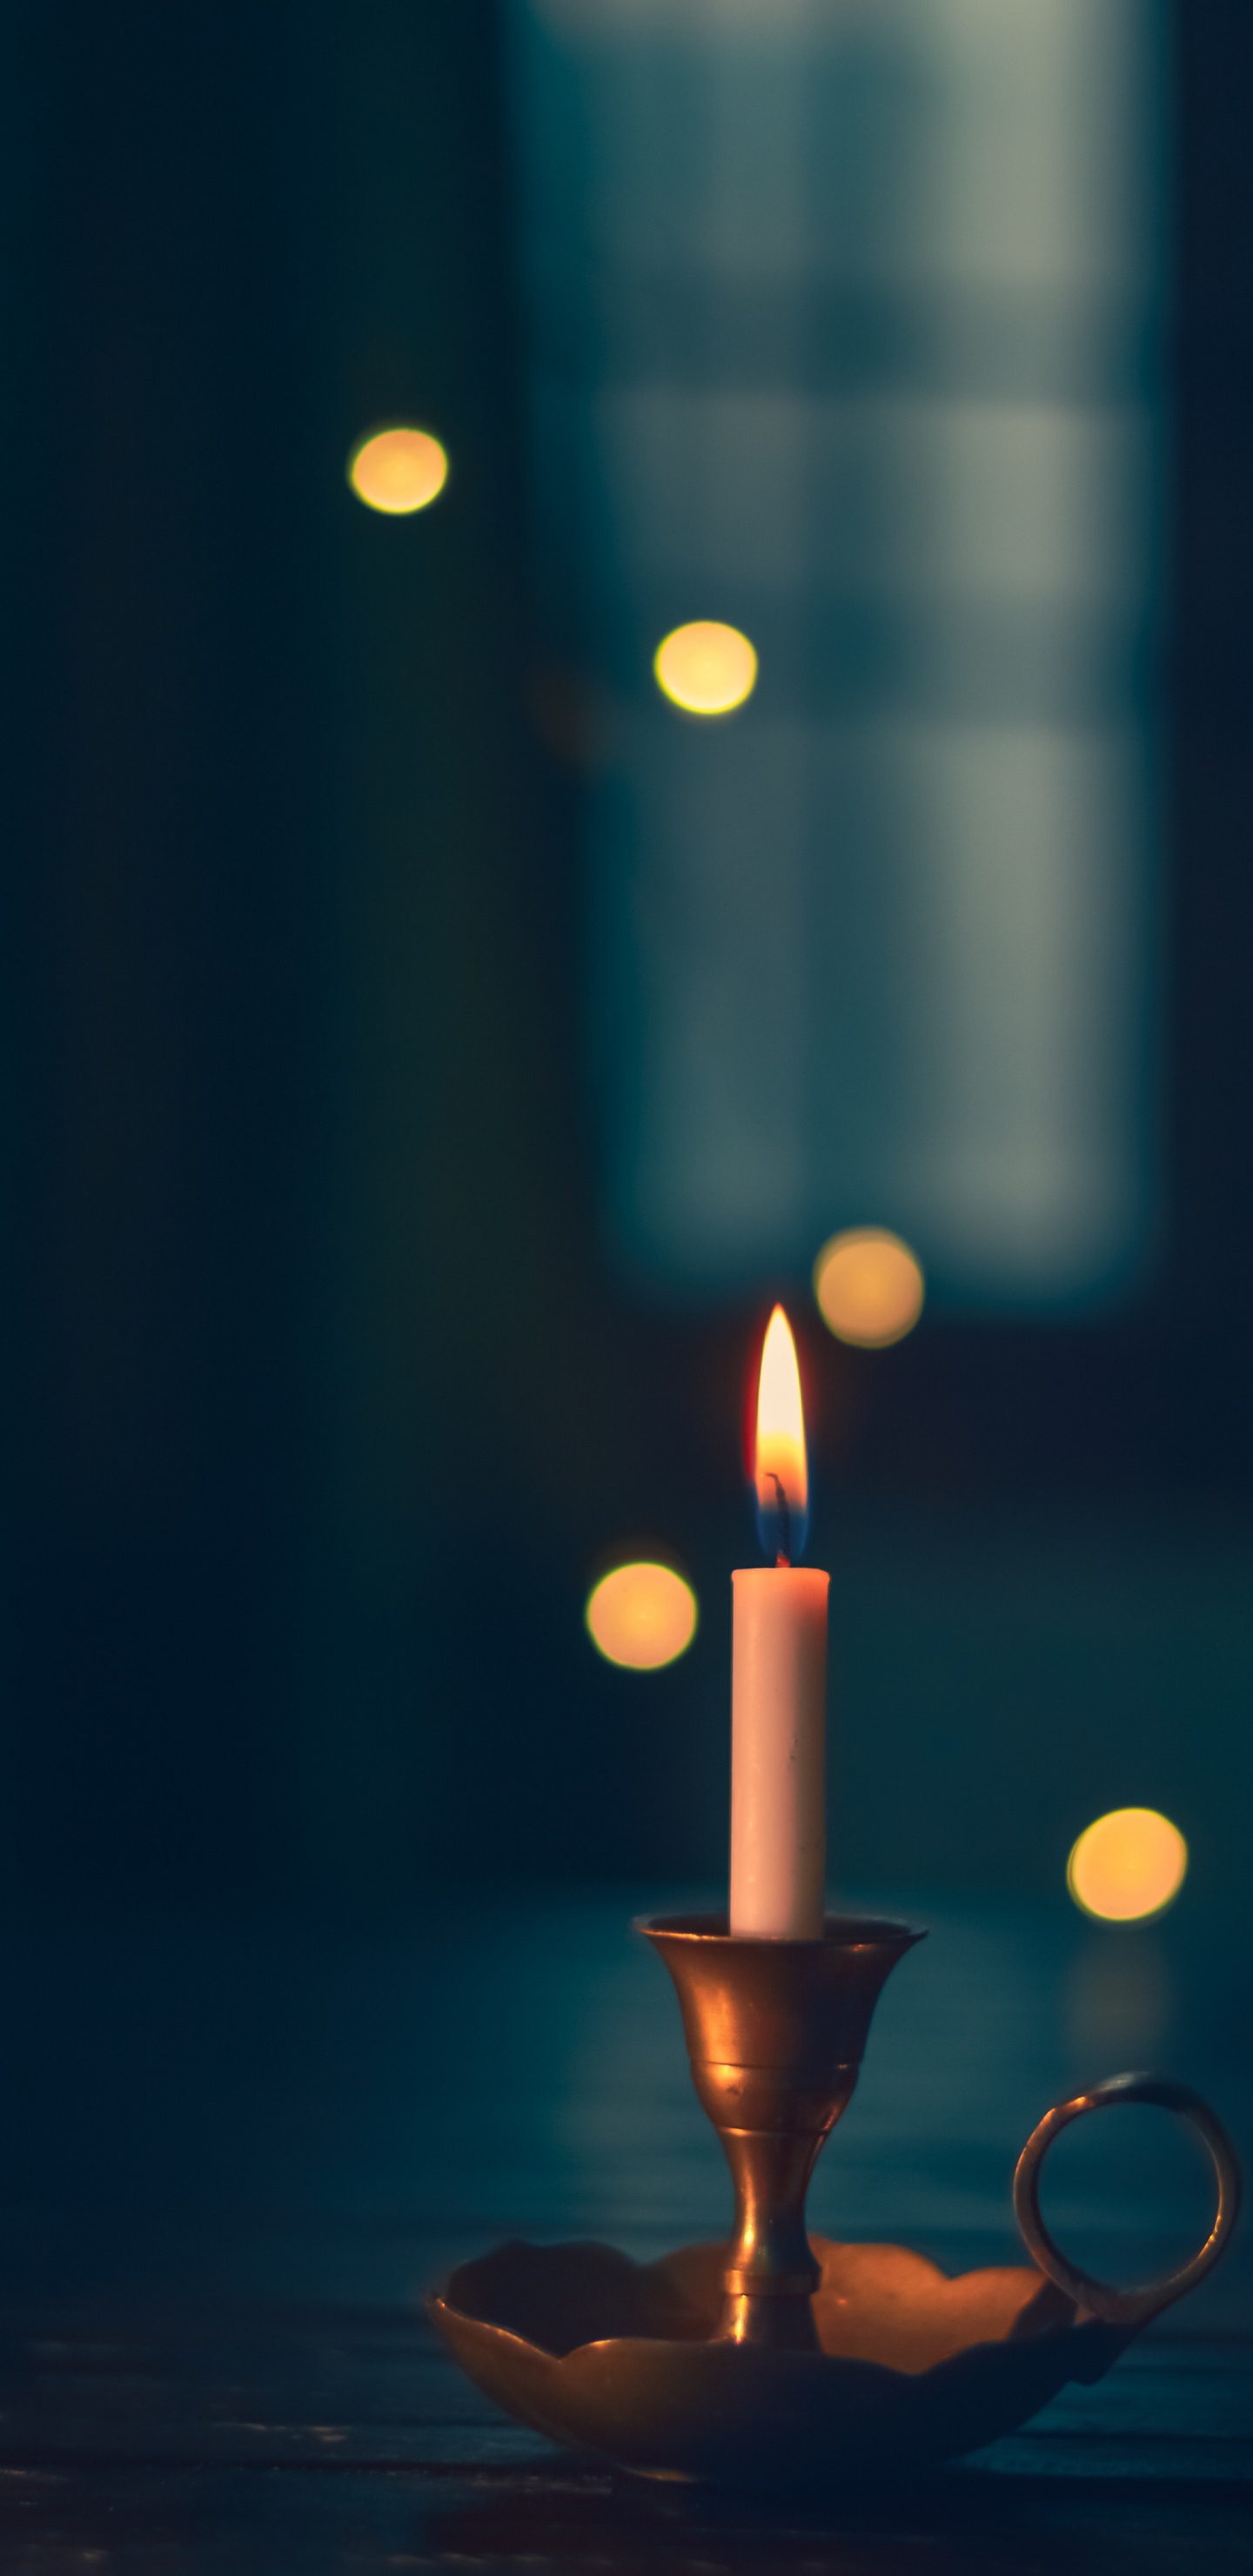 Lighted Candle in Black Holder. Wallpaper in 1440x2960 Resolution